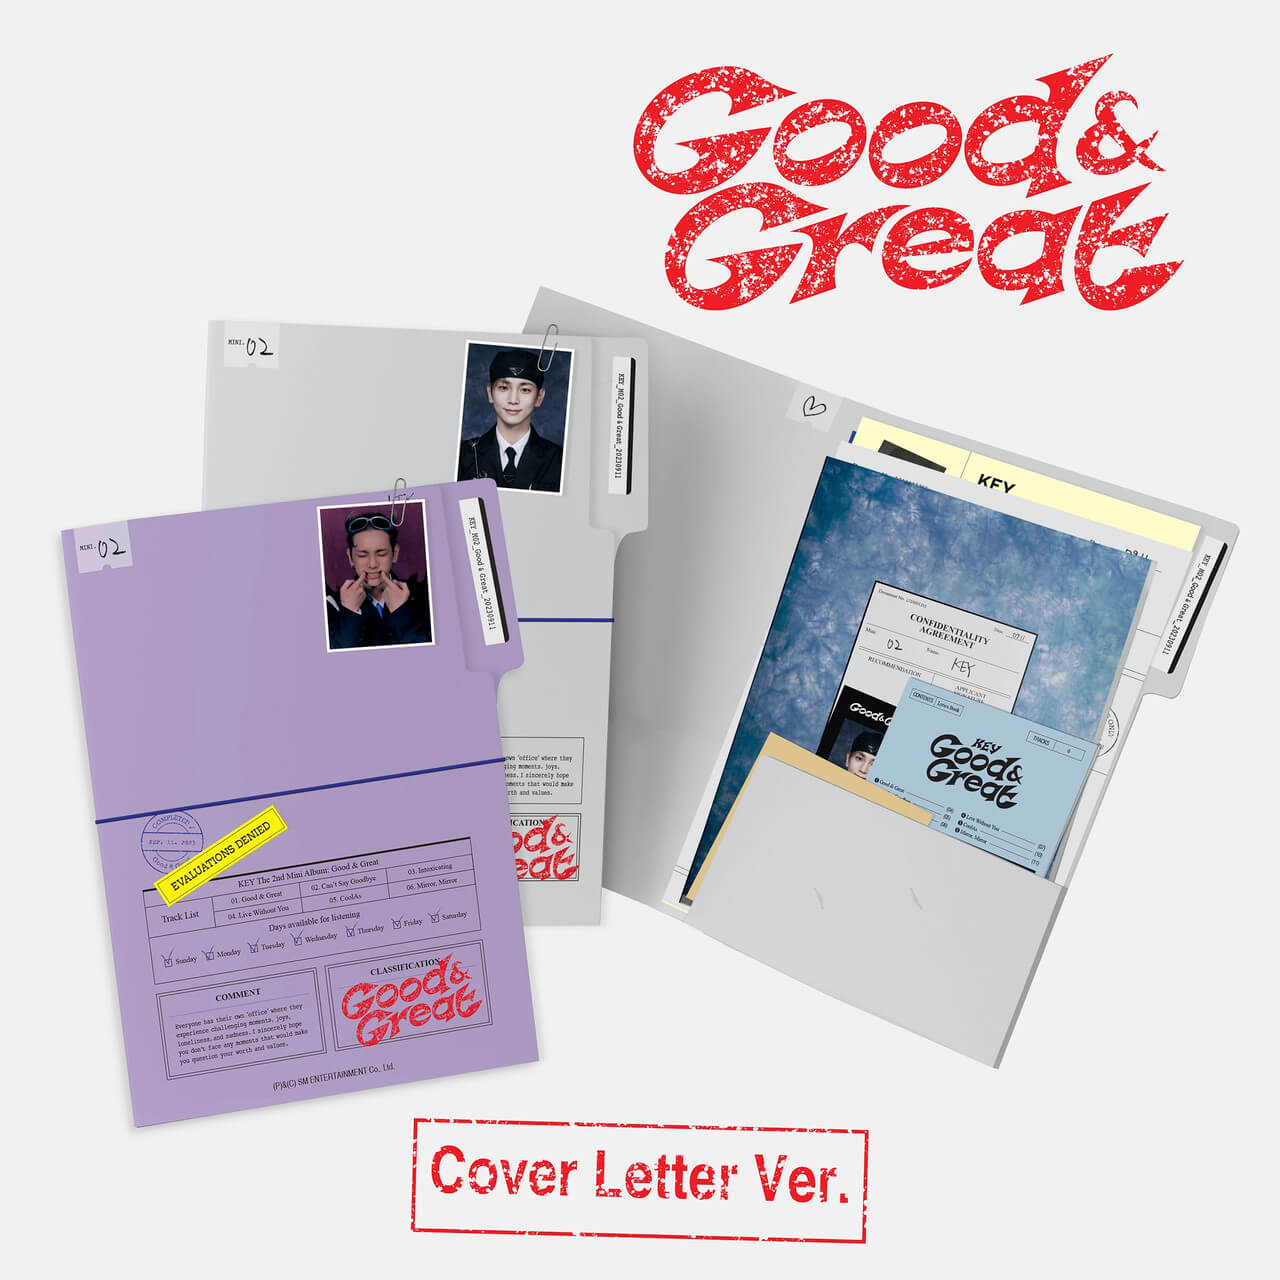 Key (SHINee) 2nd Mini Album Good & Great (Cover Letter Ver.) - Dynamic / Neat Version